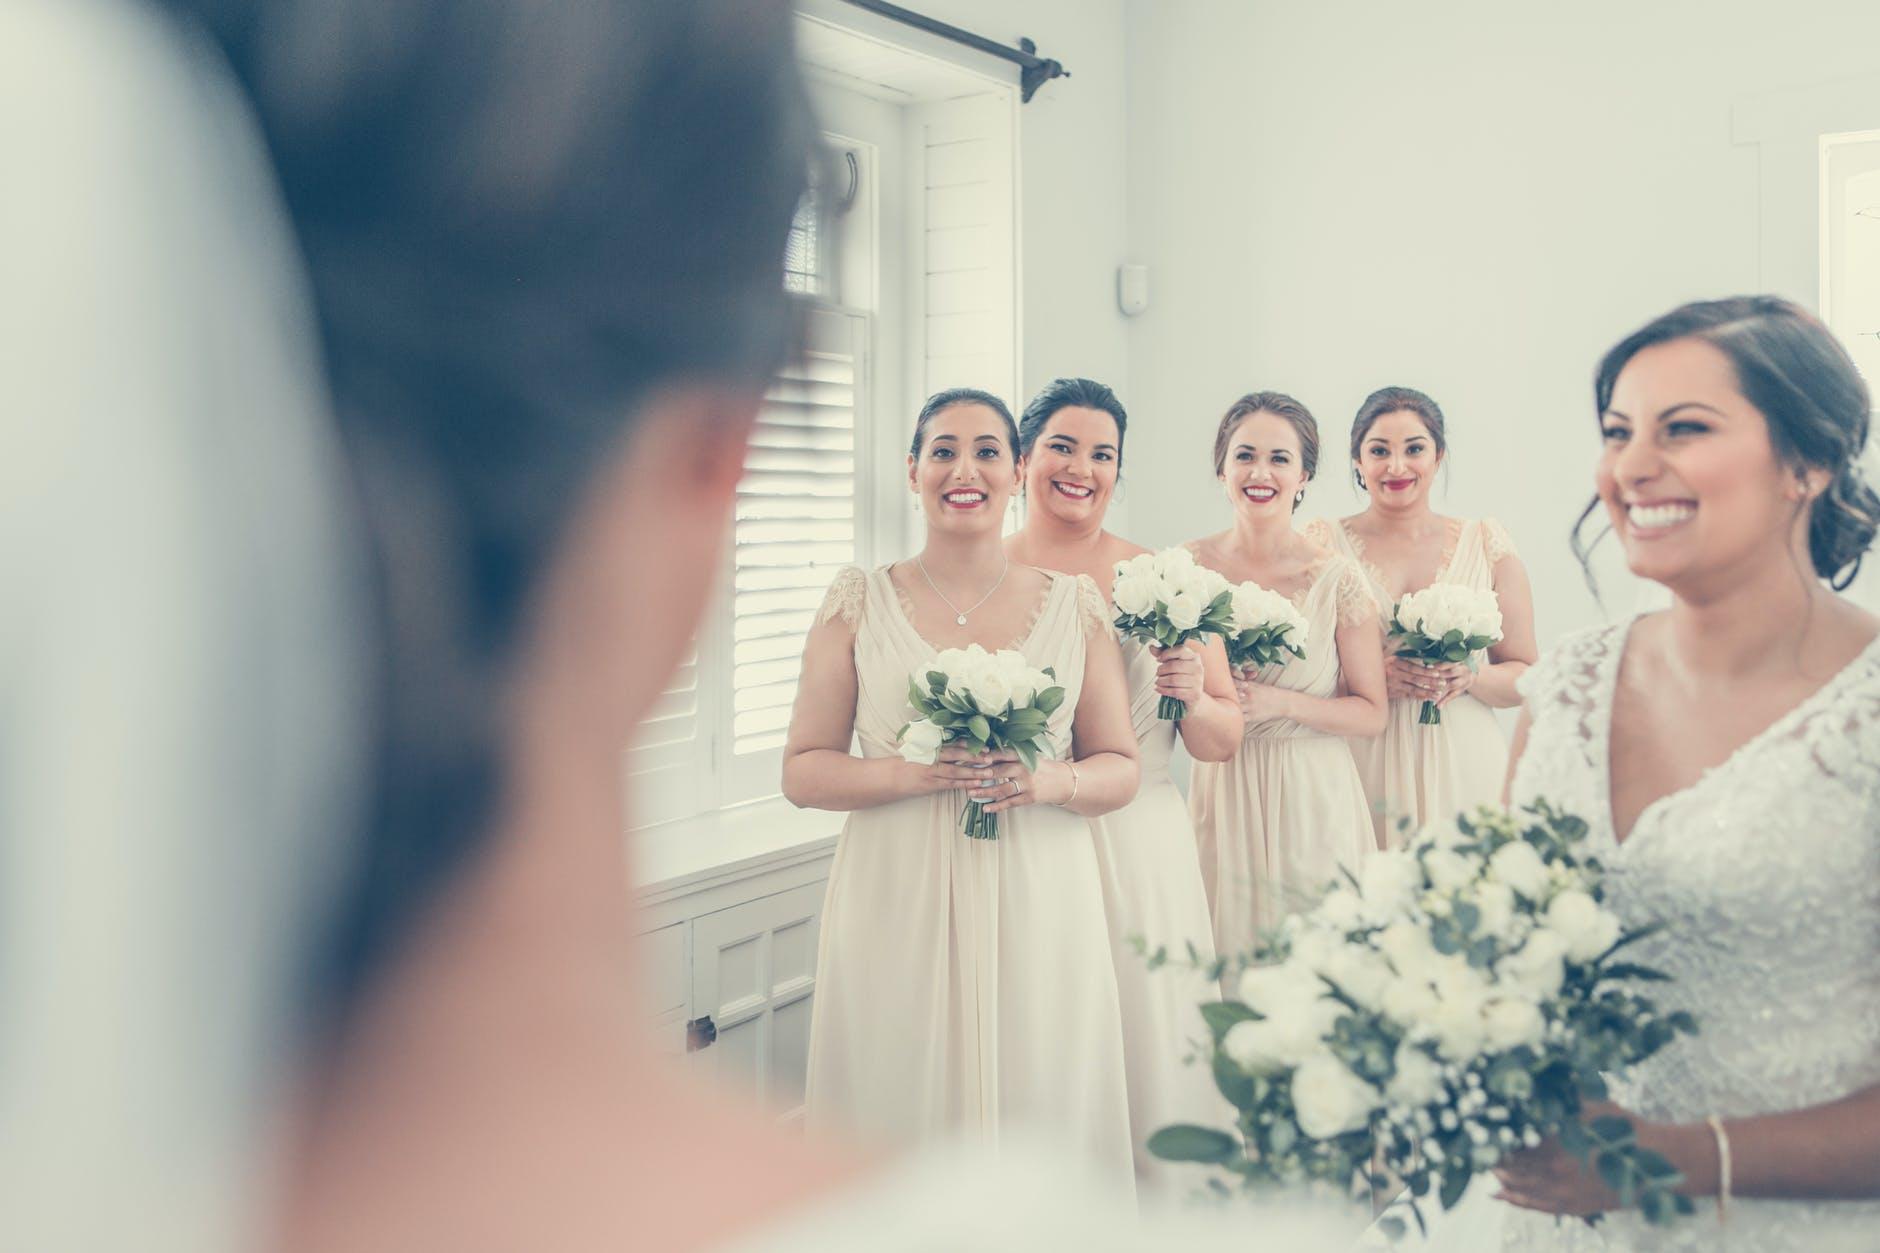 Hire wedding gown cleaning service in DC